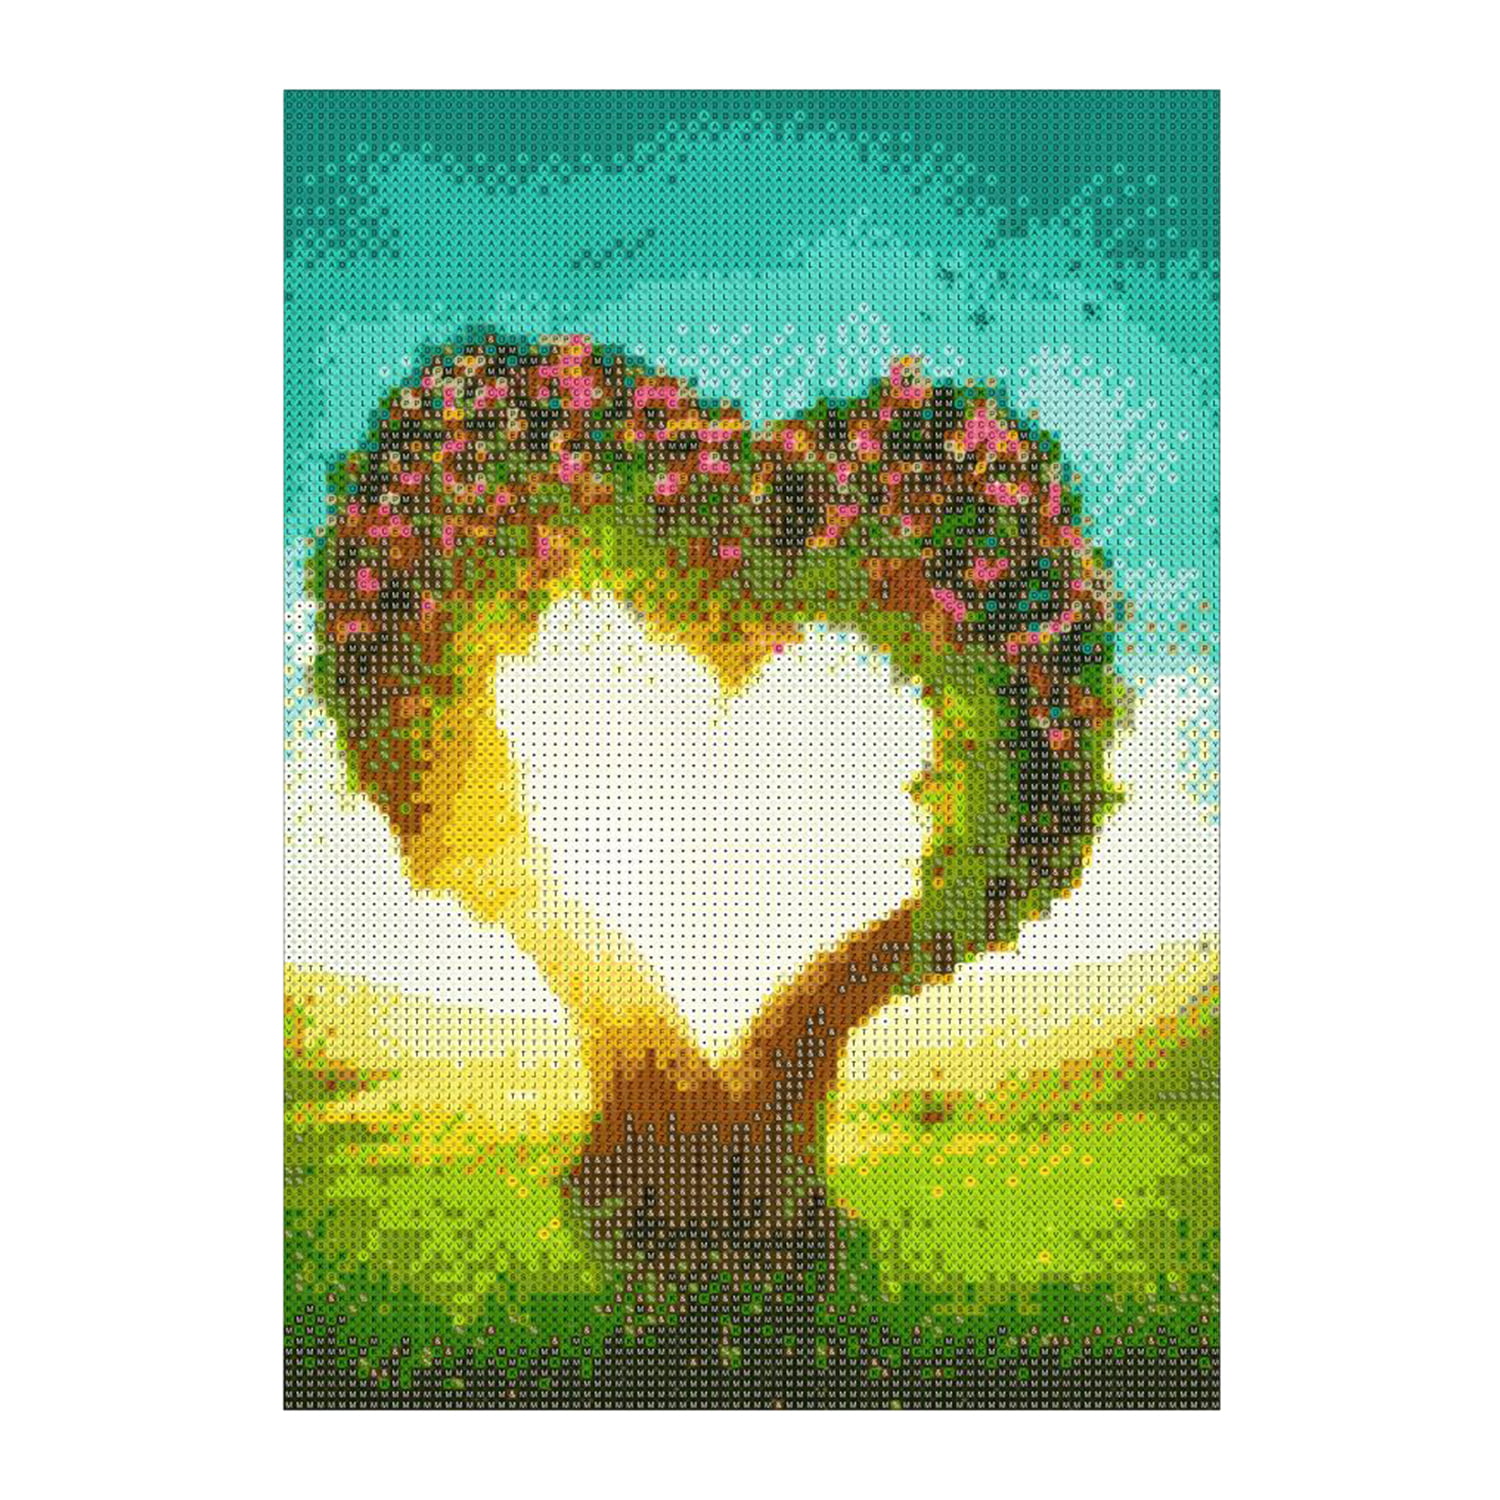 Details about   Full Drill 5D Diamond Painting Embroidery Arts Craft DIY for Home Decor 30*30cm